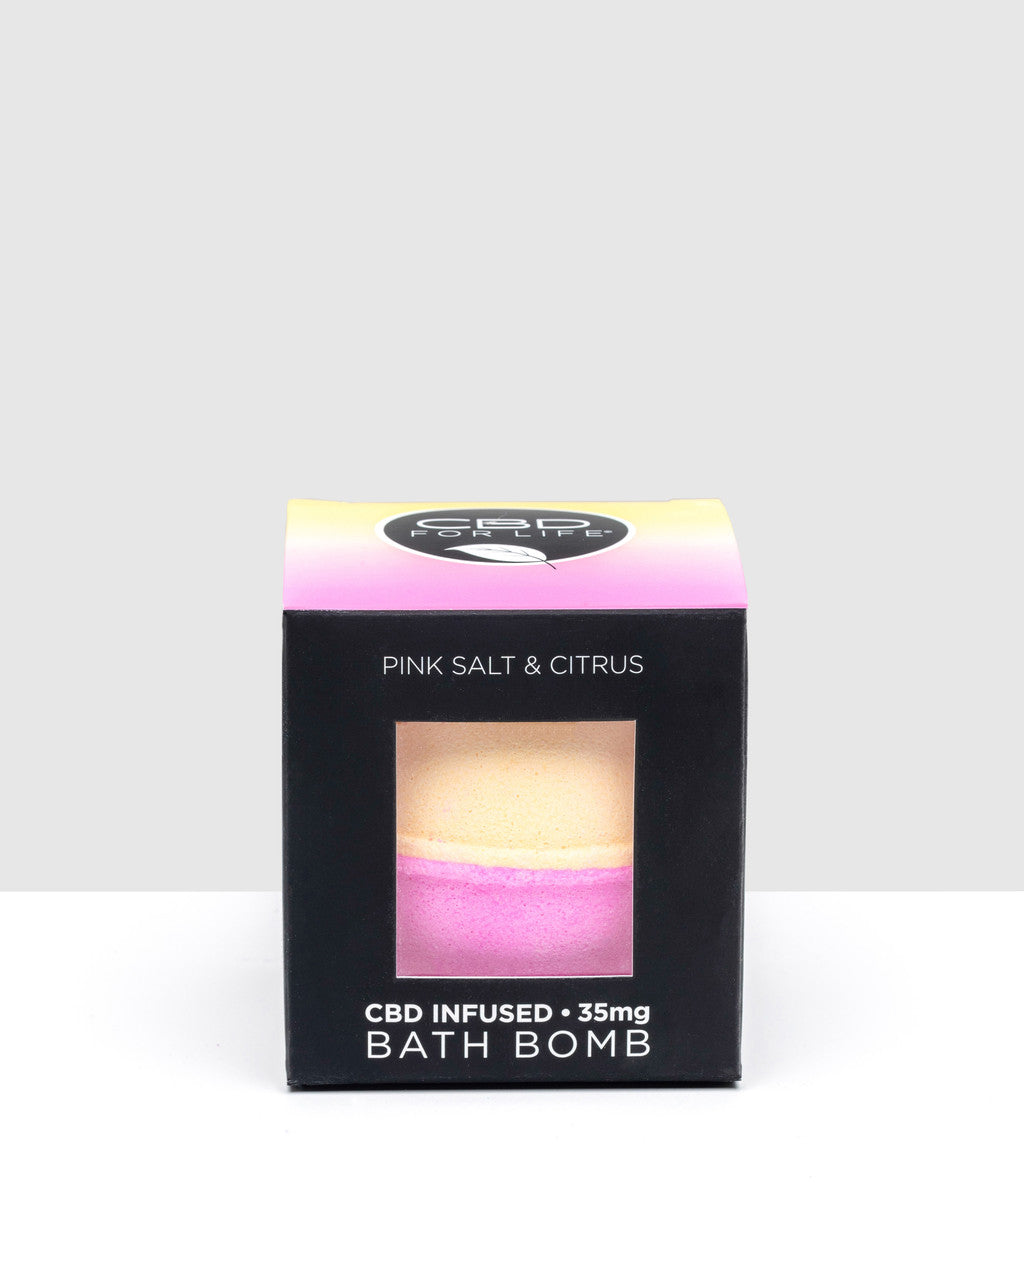 Chill your mind. Soothe your body. Soften your skin. That’s exactly what happens when you take a tub with a Pink Salt and Citrus CBD Bath Bomb